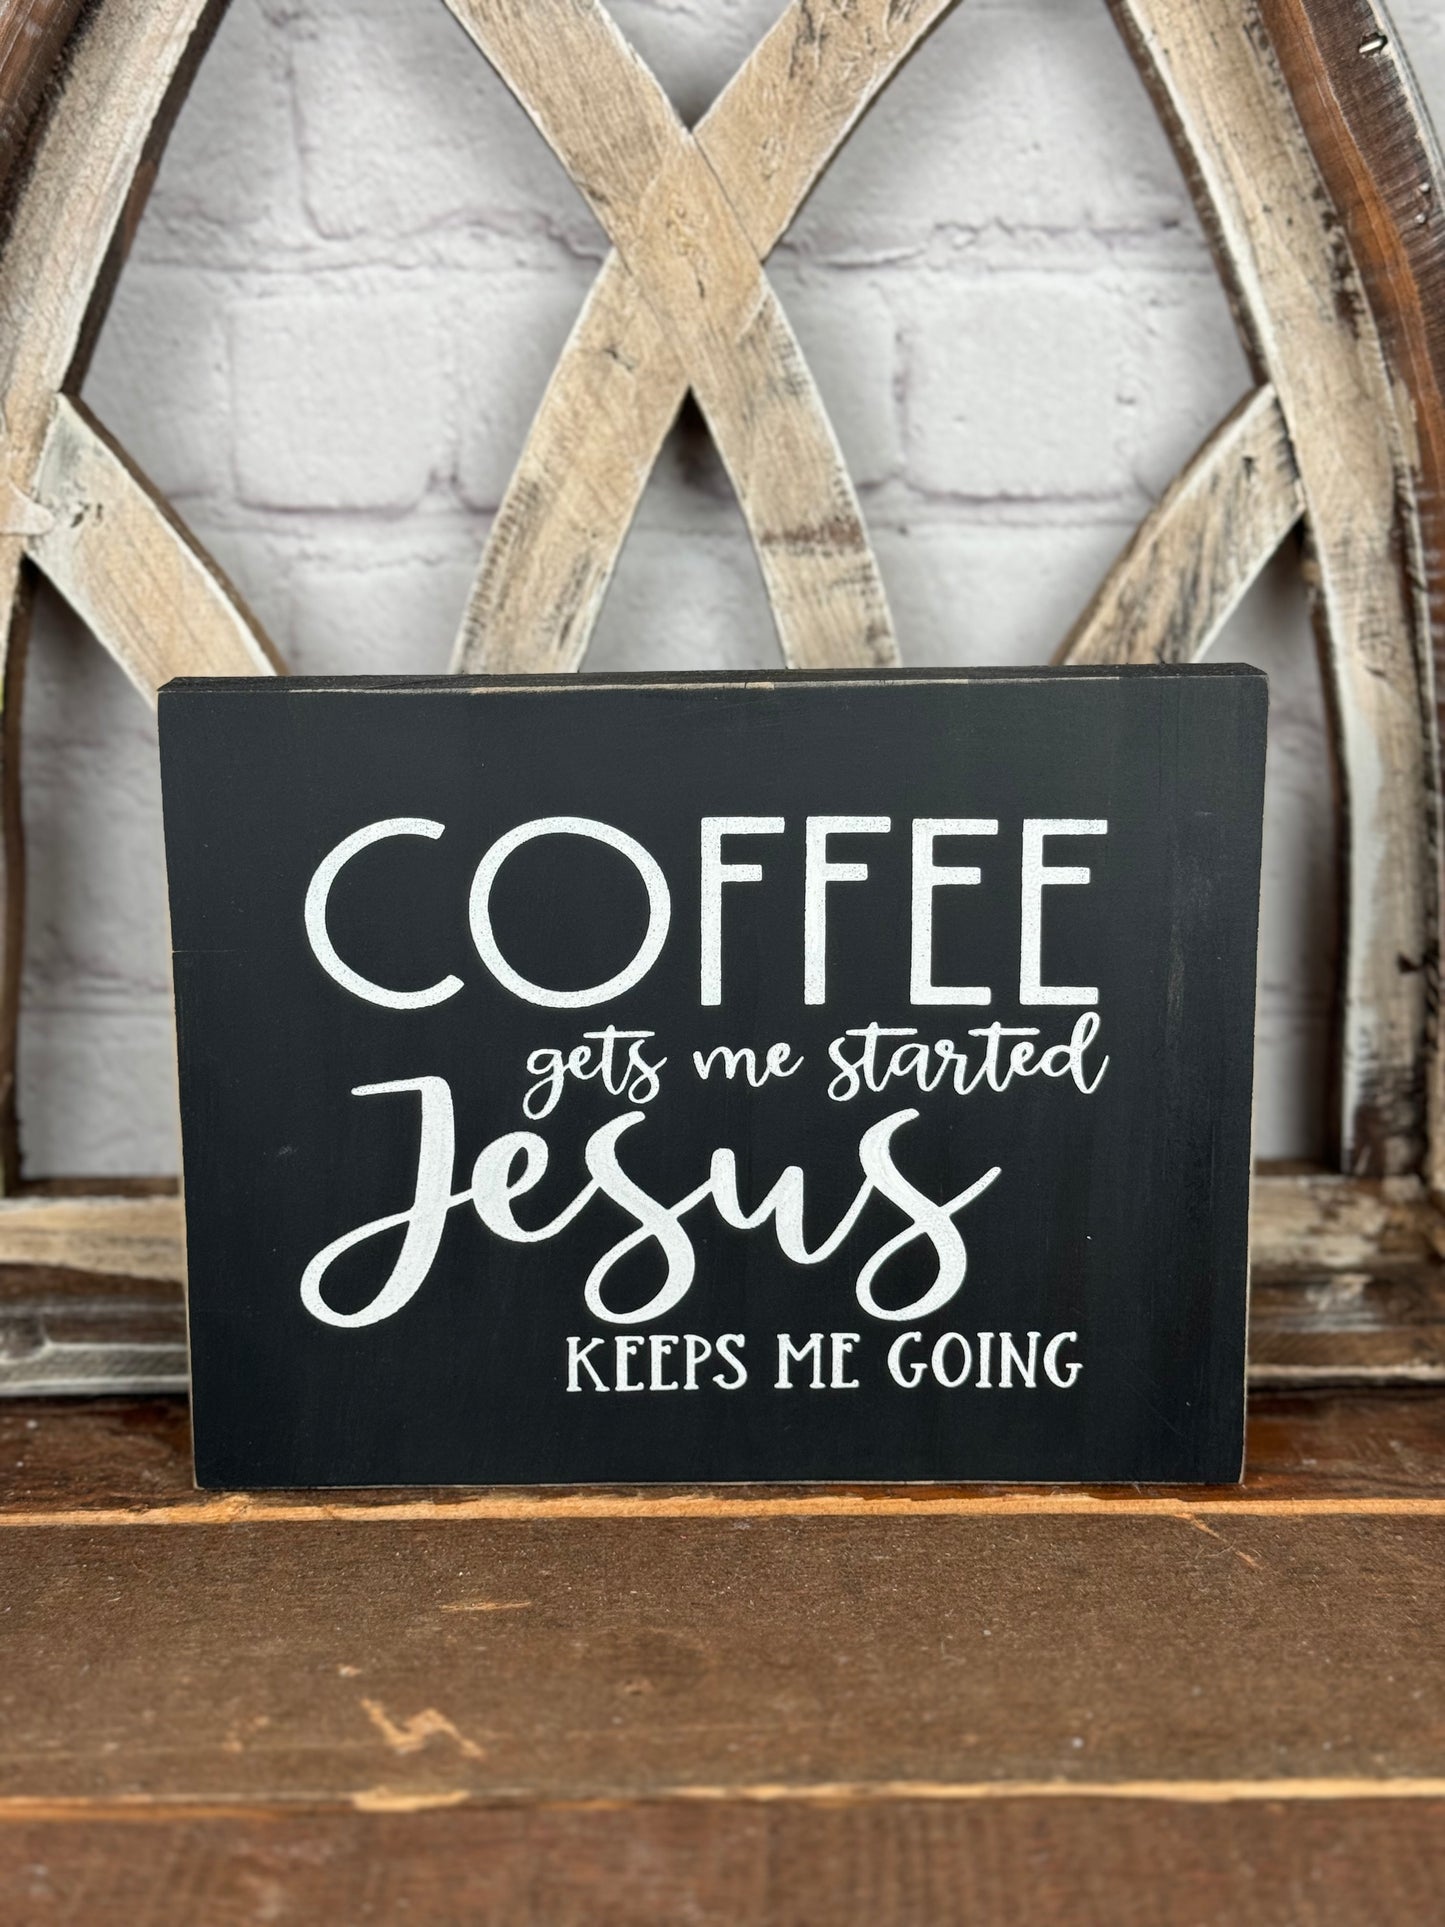 COFFEE GETS ME STARTED JESUS KEEPS ME GOING -WOOD SIGN